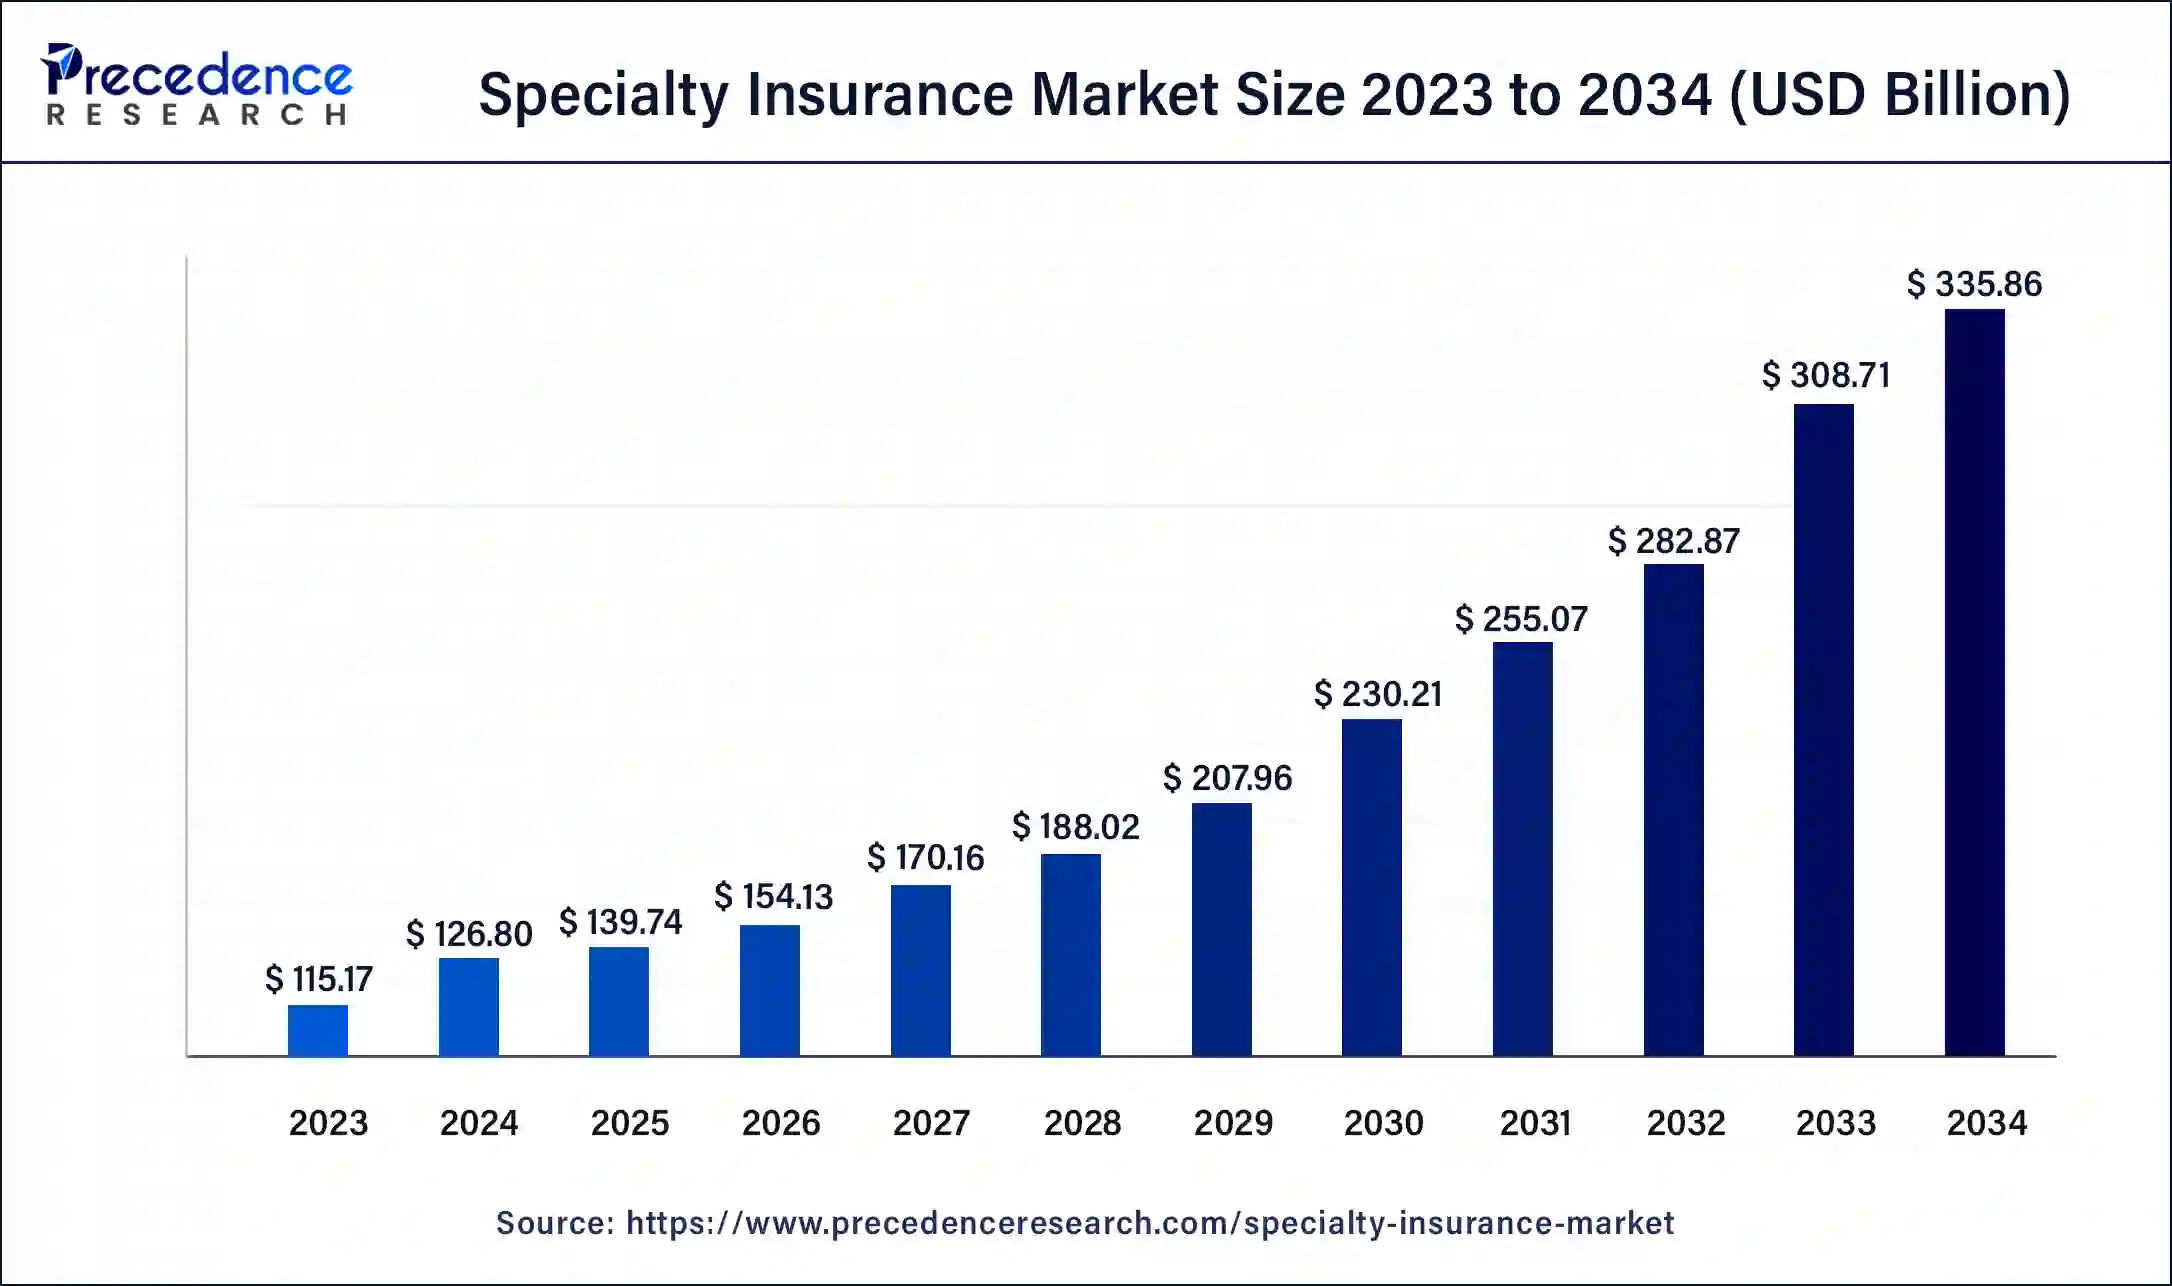 Specialty Insurance Market Size 2024 To 2034